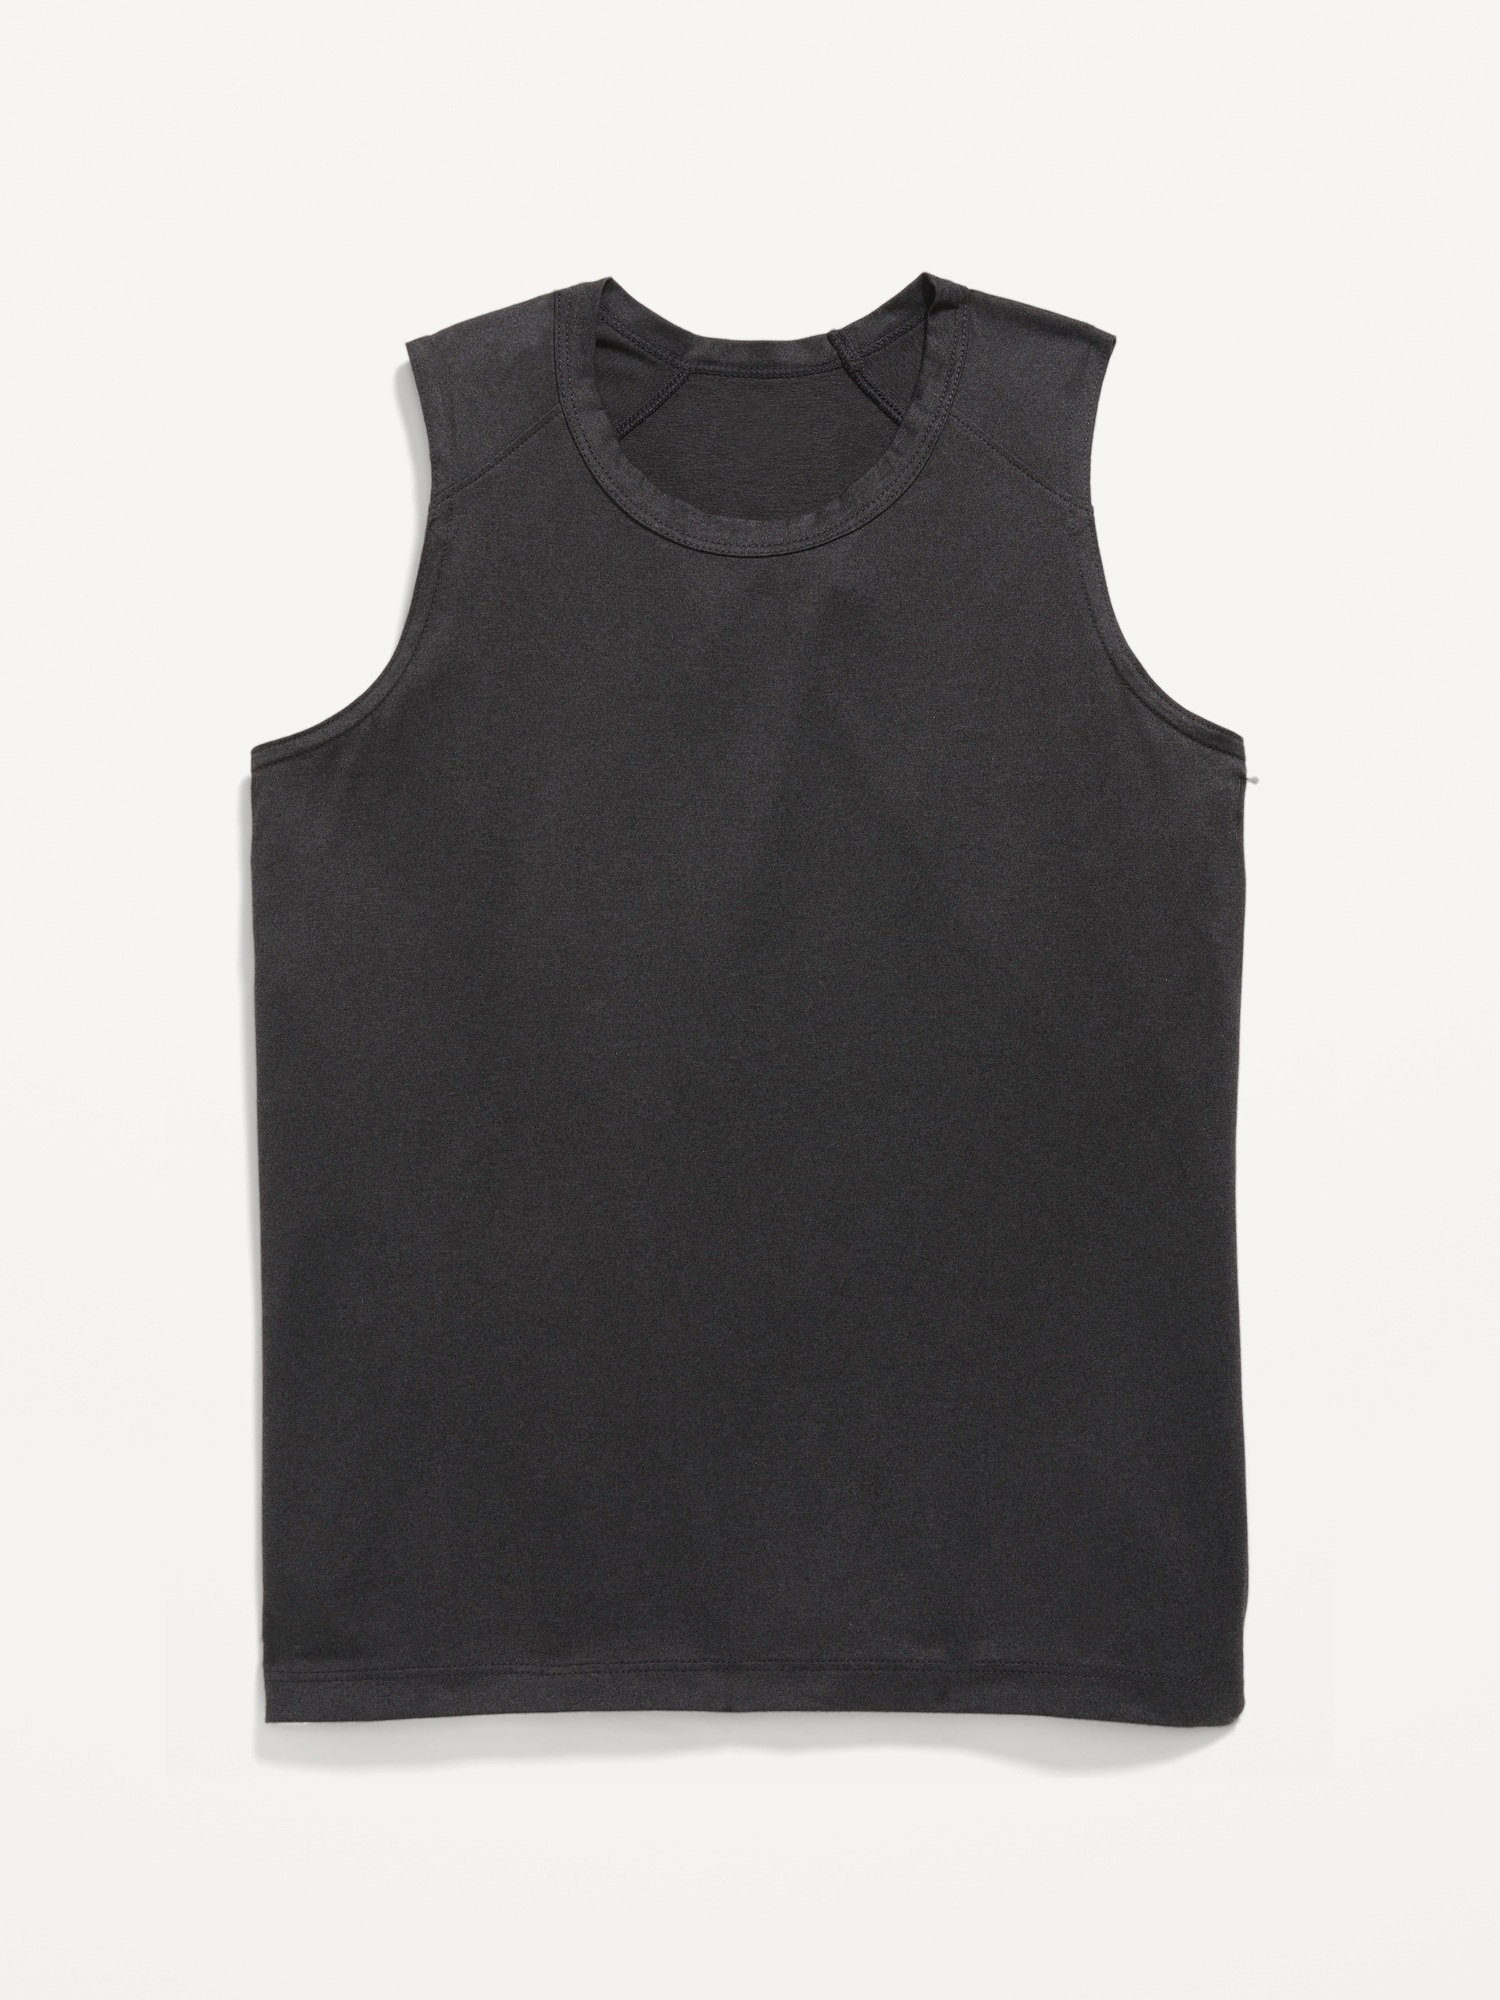 Old Navy Cloud 94 Soft Go-Dry Cool Performance Tank for Boys black. 1